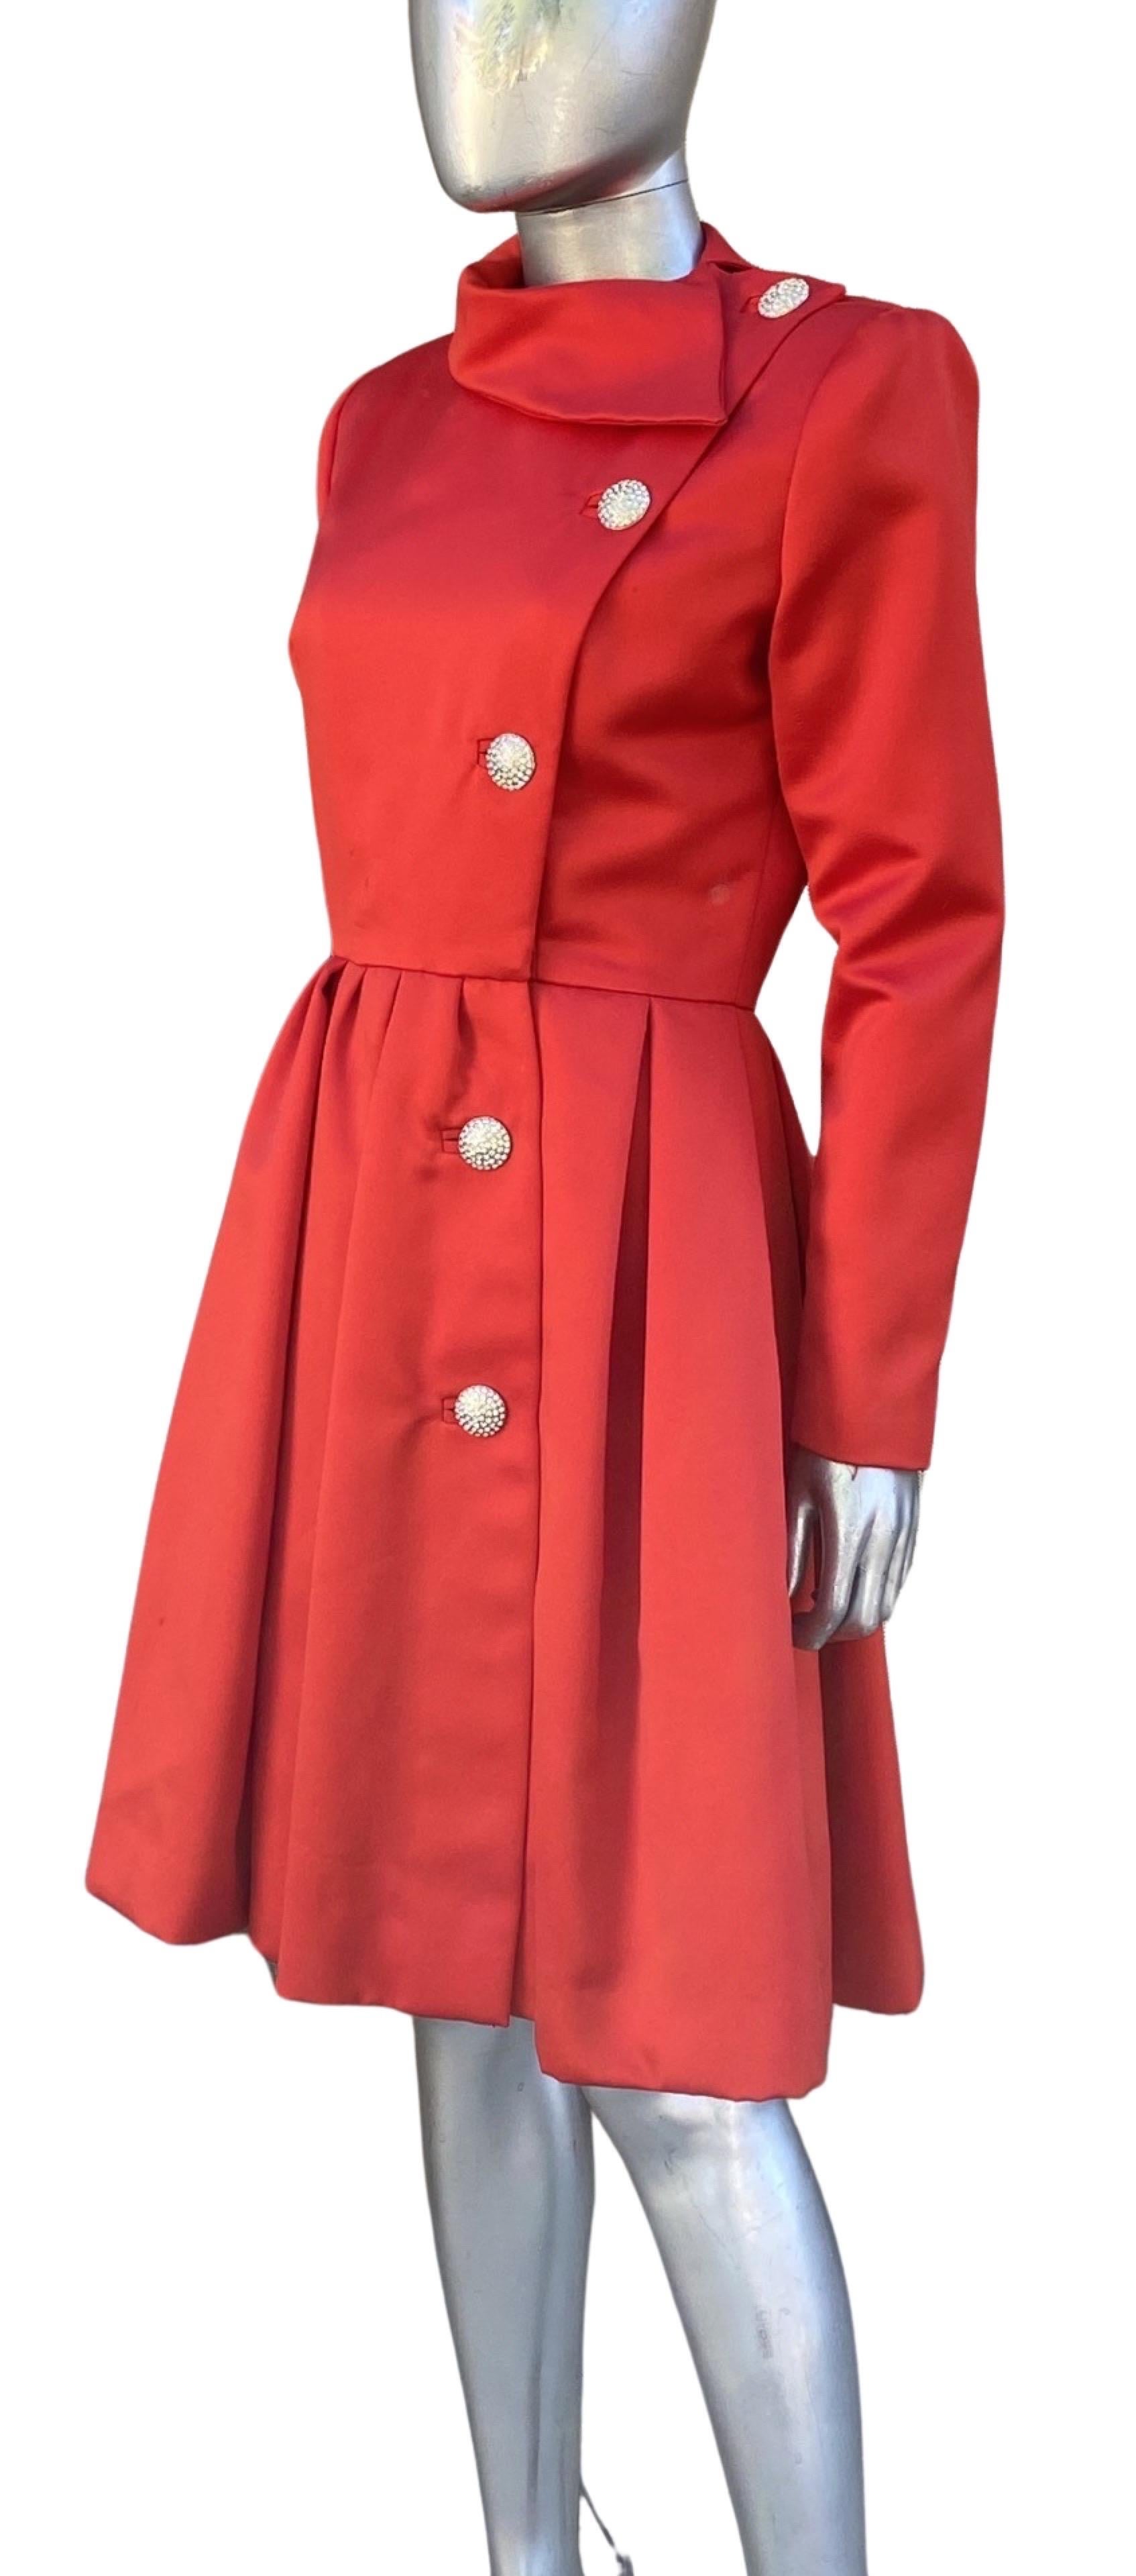 Red Satin and Rhinestone Button Coat Dress by Victor Costa Neiman Marcus Size 8 For Sale 3